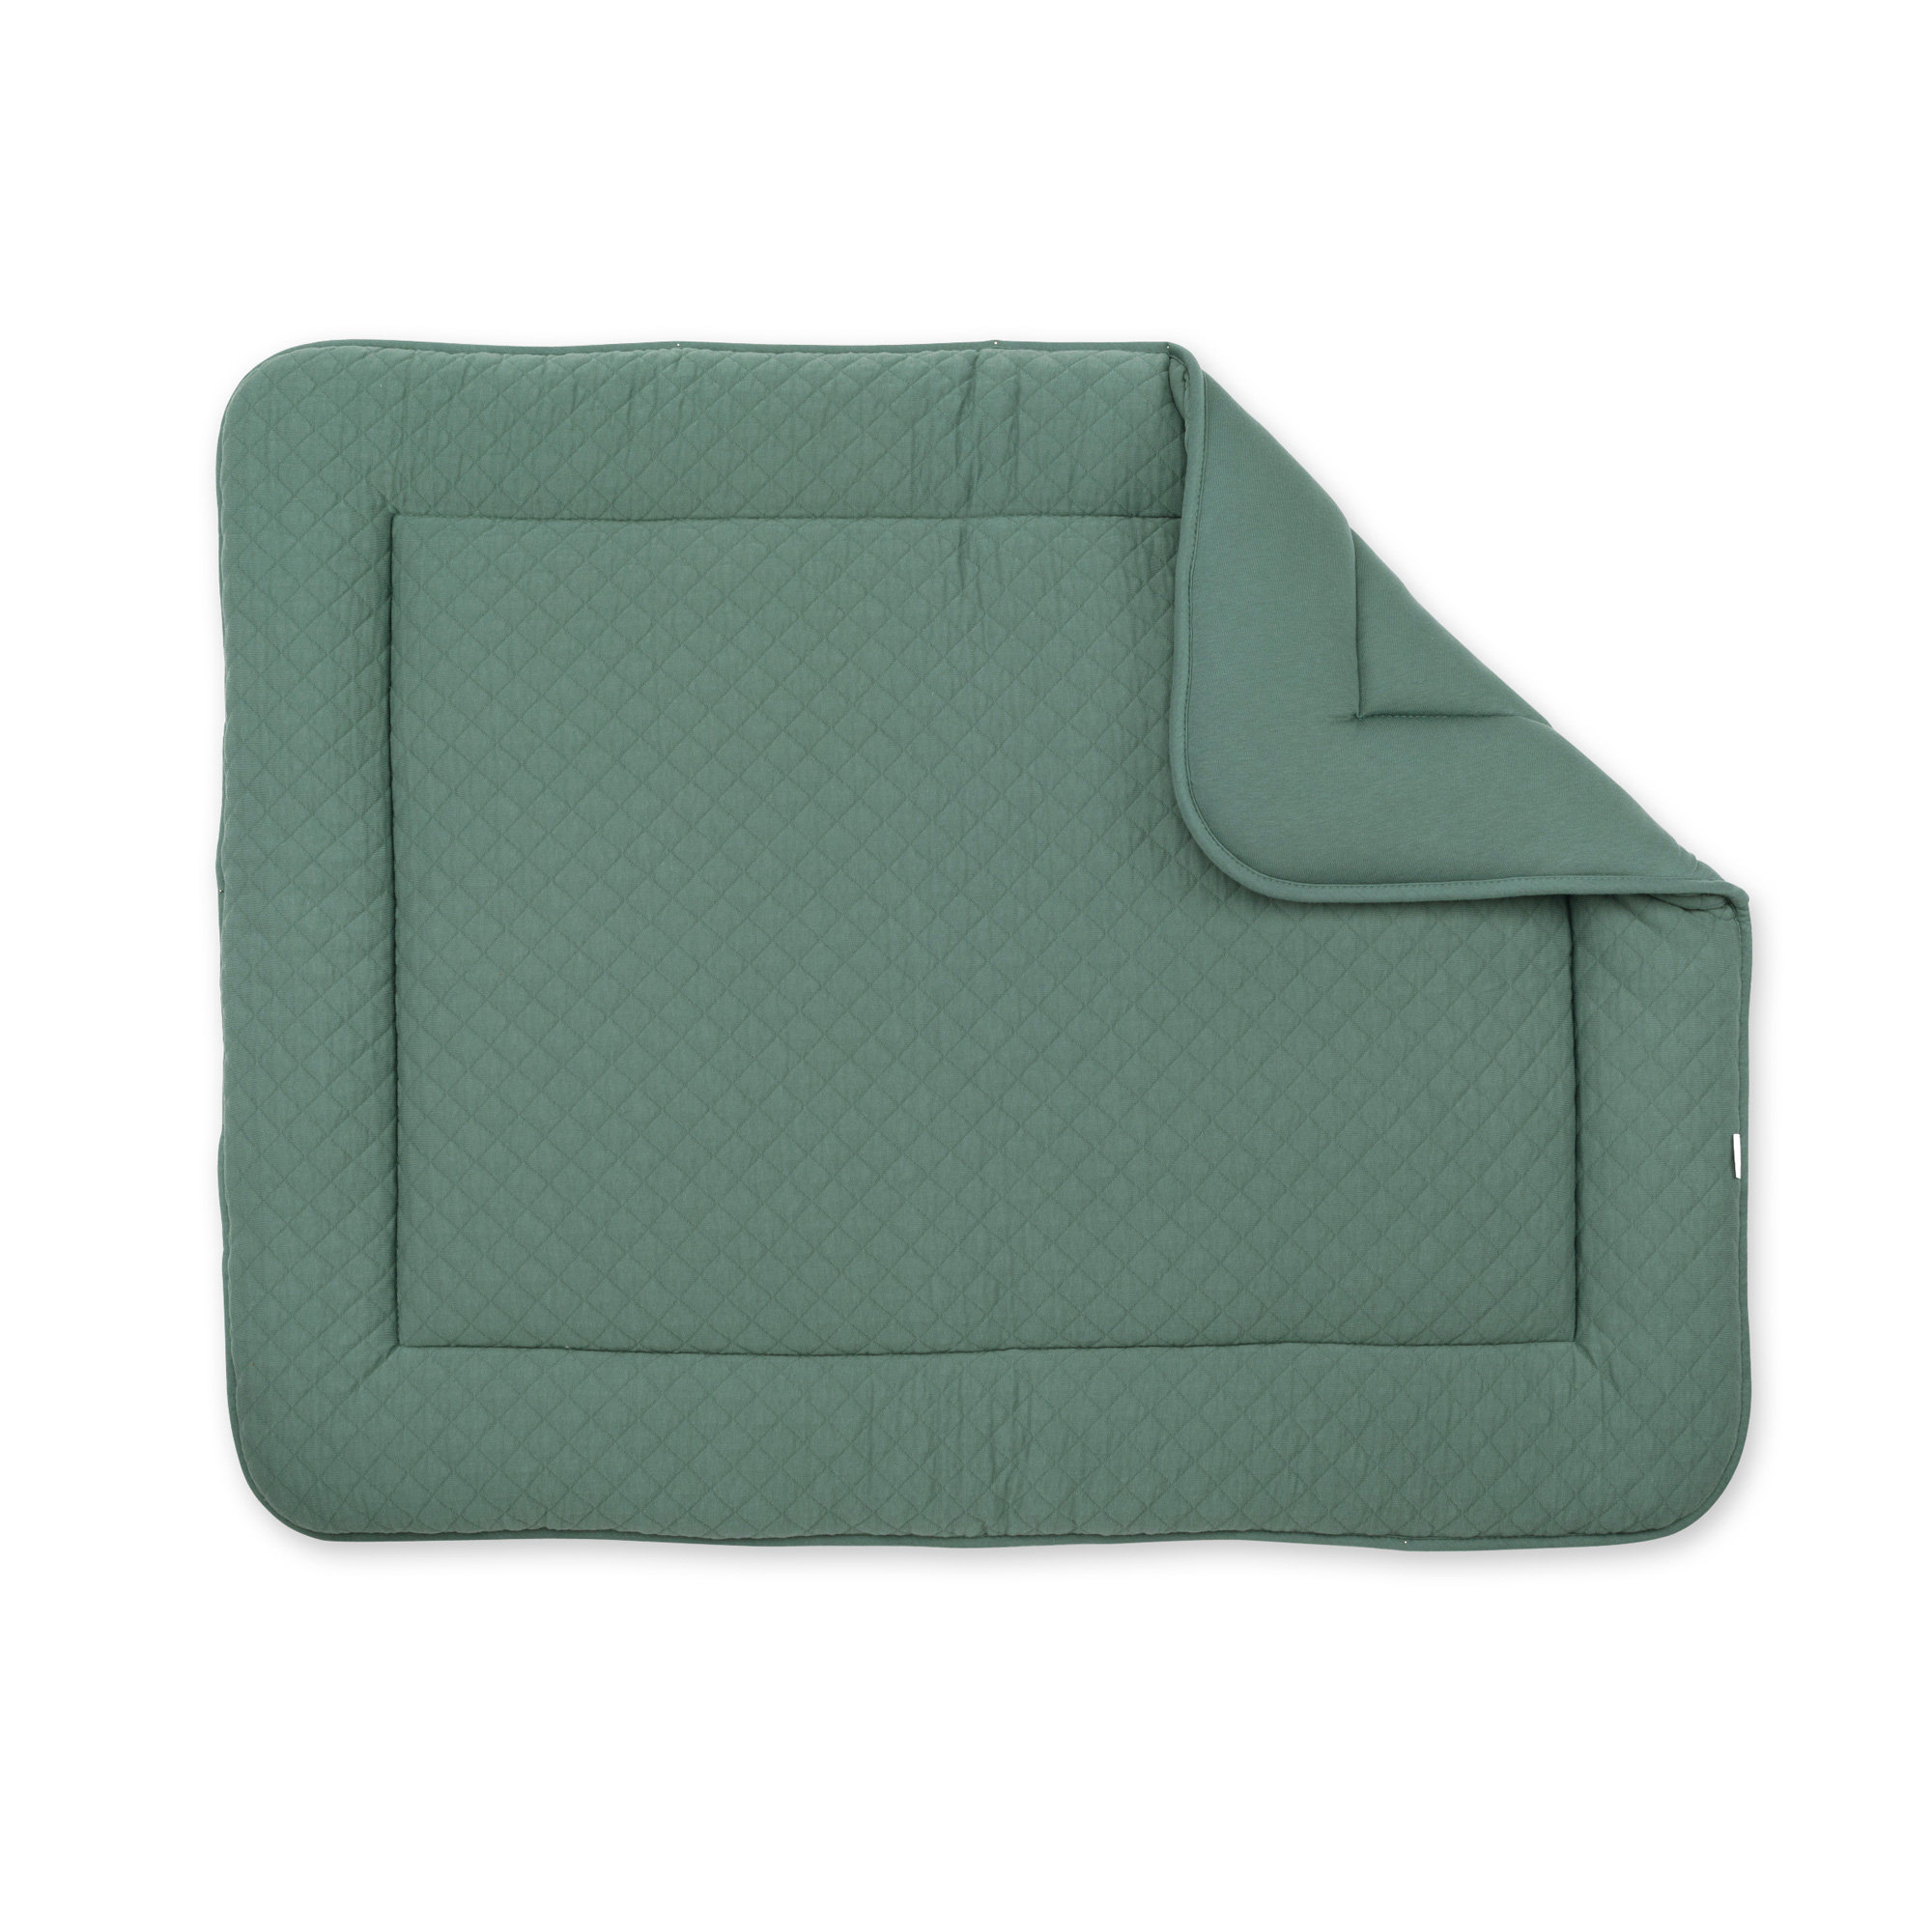 Padded play mat Pady quilted 75x95cm QUILT Green